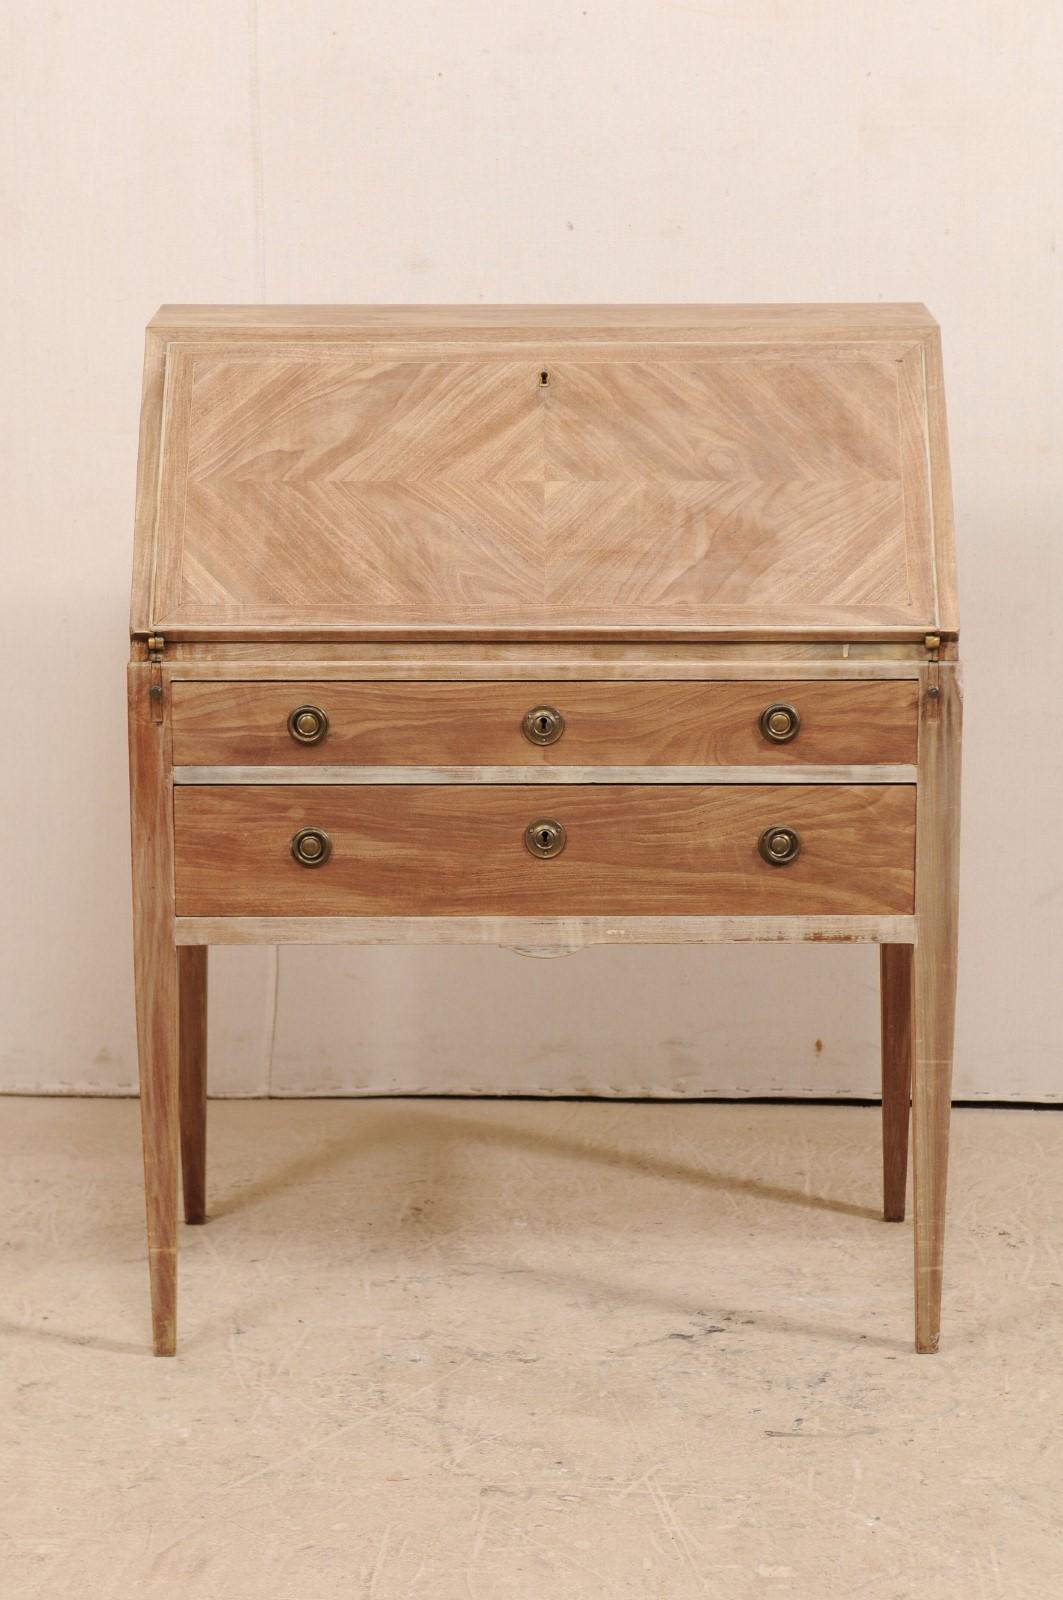 A Swedish drop-leaf secretary from the mid-20th century. This Swedish slant-top writing desk, with it's simplistic and clean design, features a top leaf which folds down to reveal smaller drawers an open, center cubby hole. When this leaf is opened,